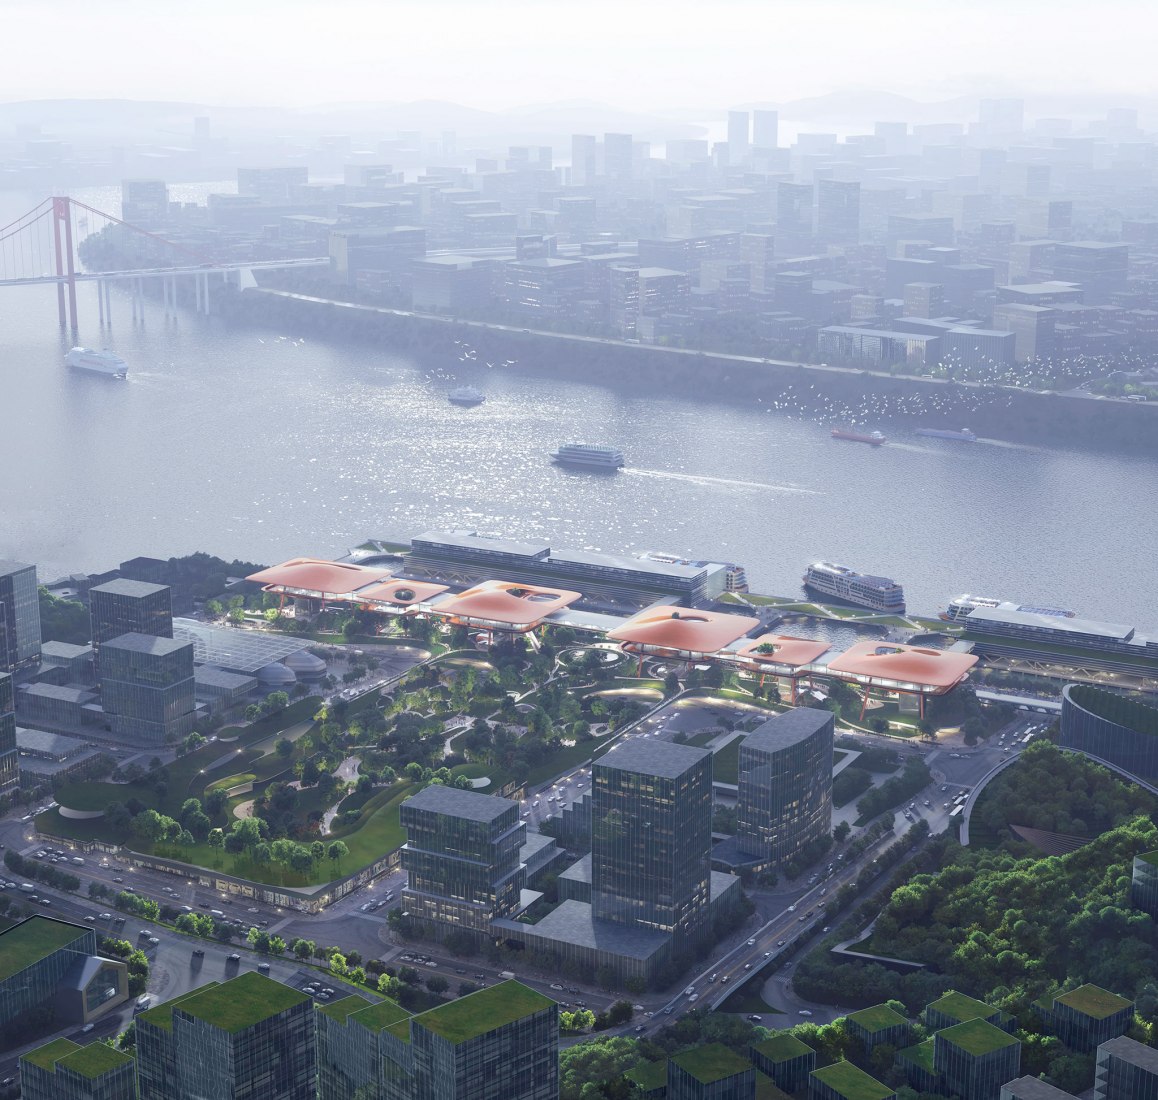 Chongqing Cuntan International Cruise Centre by MAD Architects. Image courtesy of MAD Architects